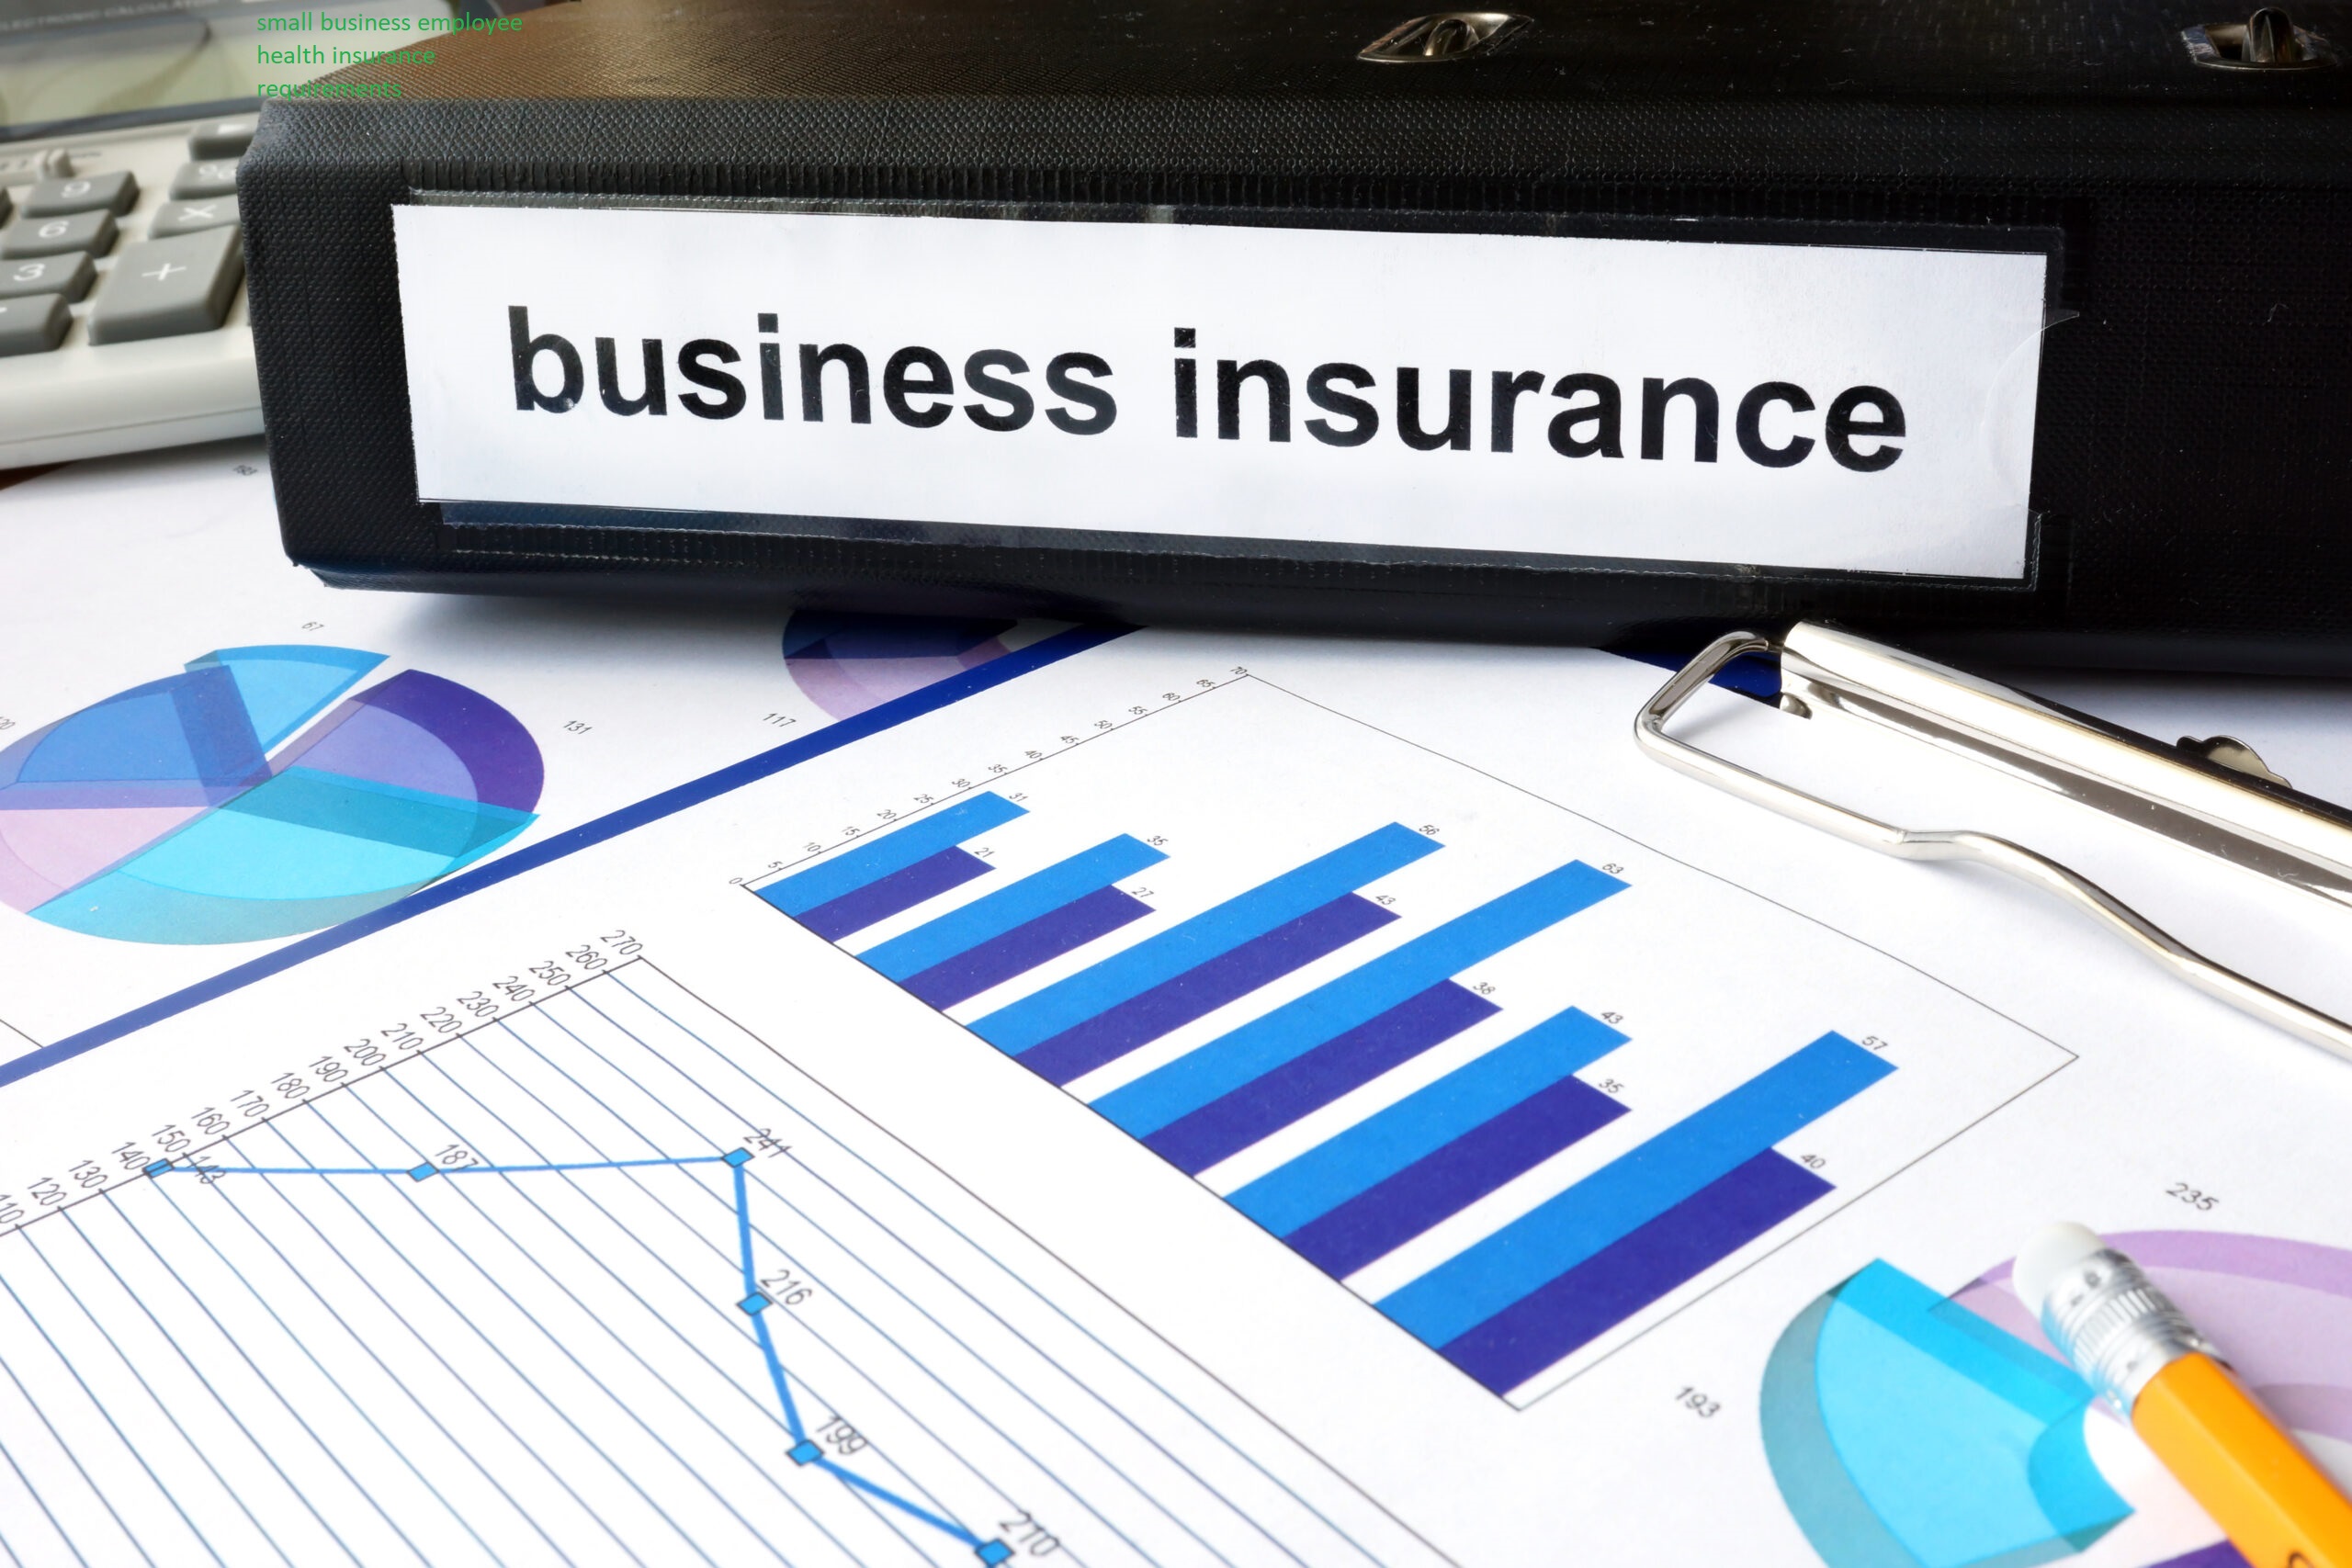 small business employee health insurance requirements